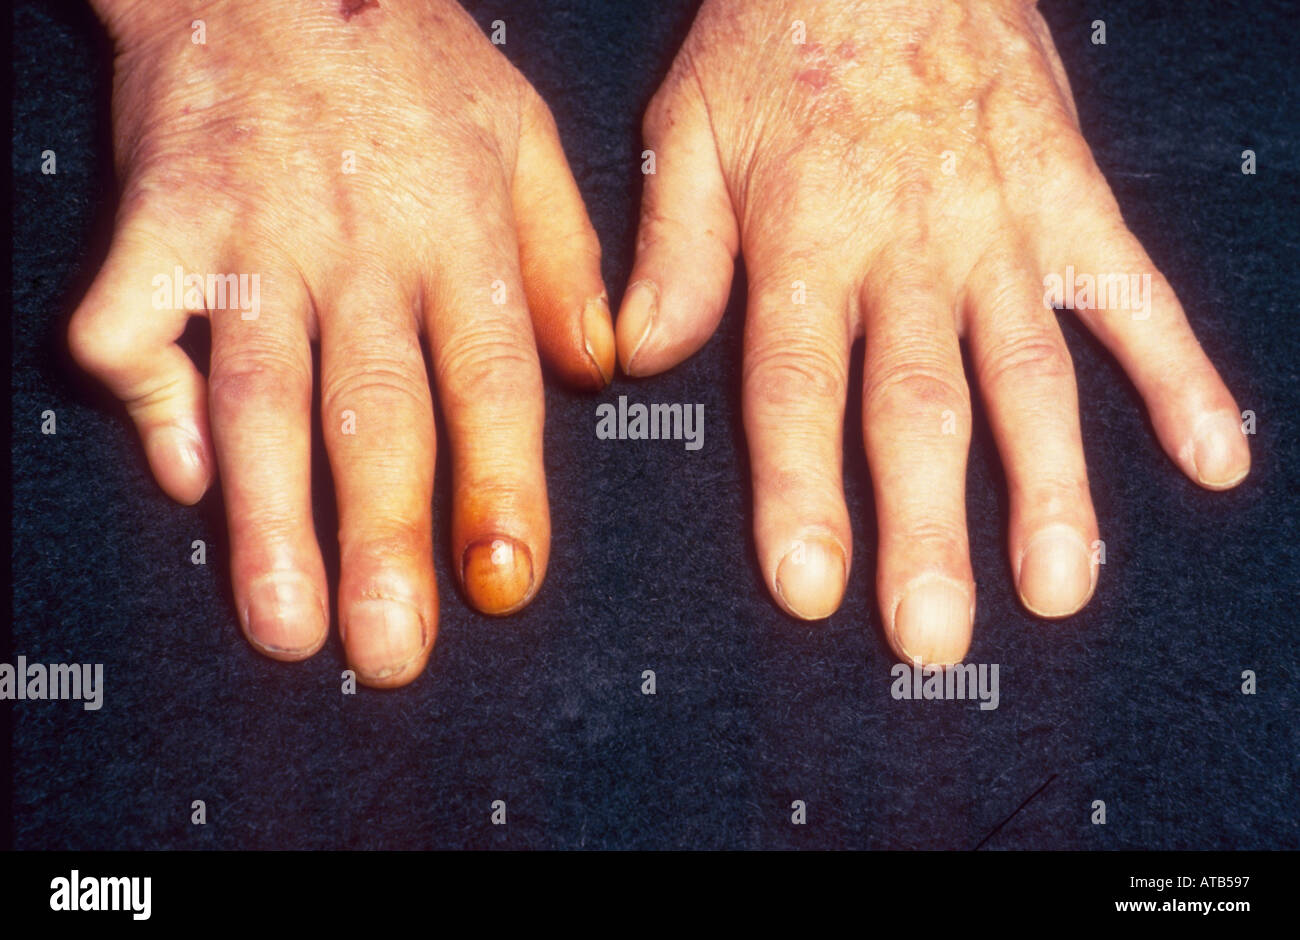 Ca bronchus finger clubbing and nicotine stains Stock Photo